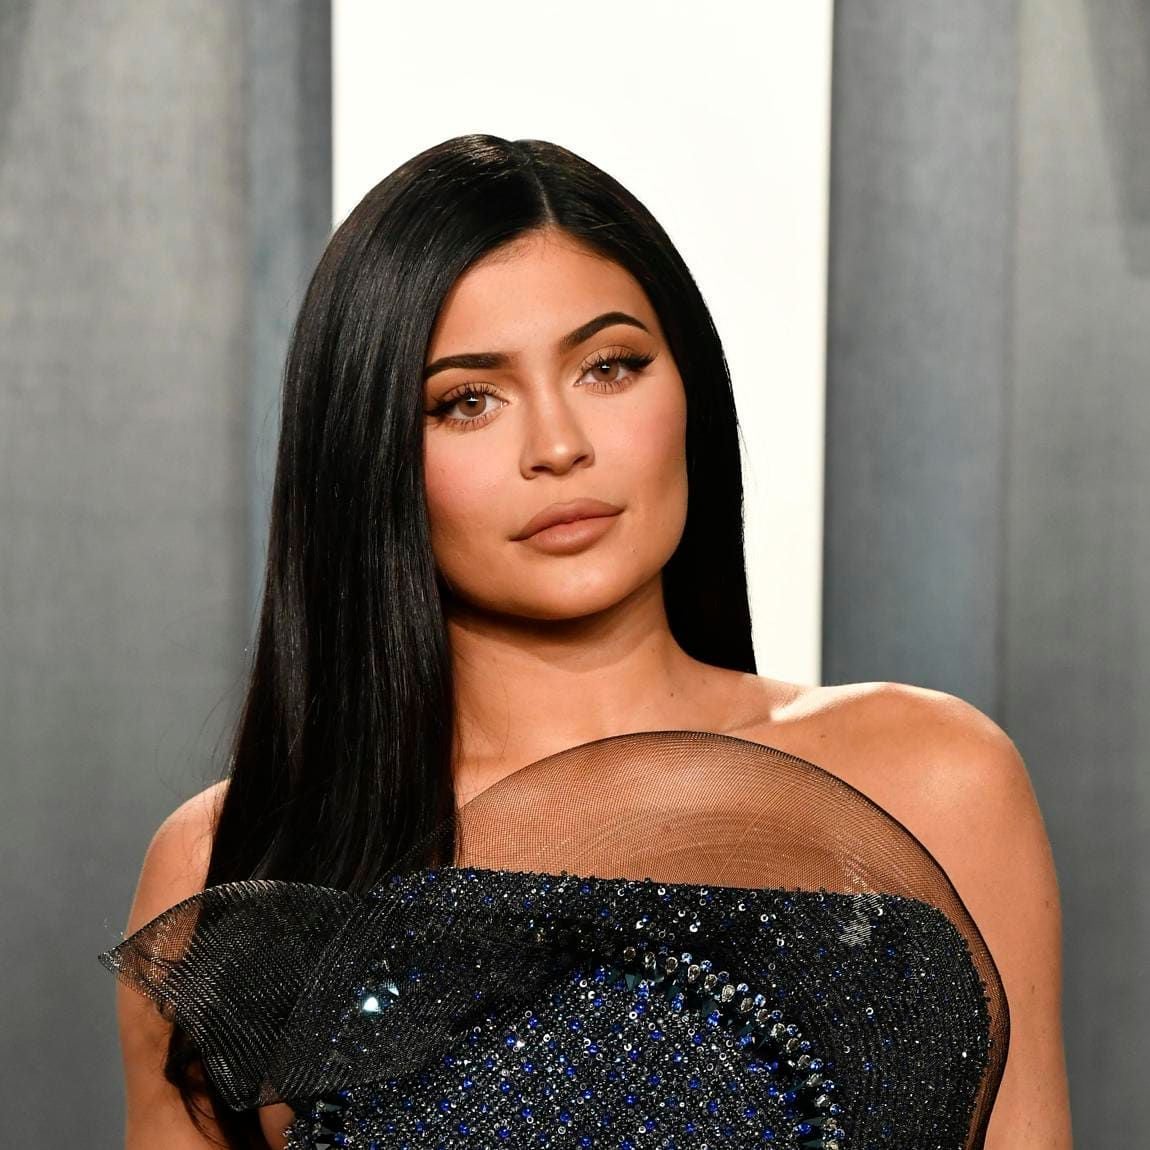 Kylie Jenner poses with straight dark hair in a shiny blue-black dress